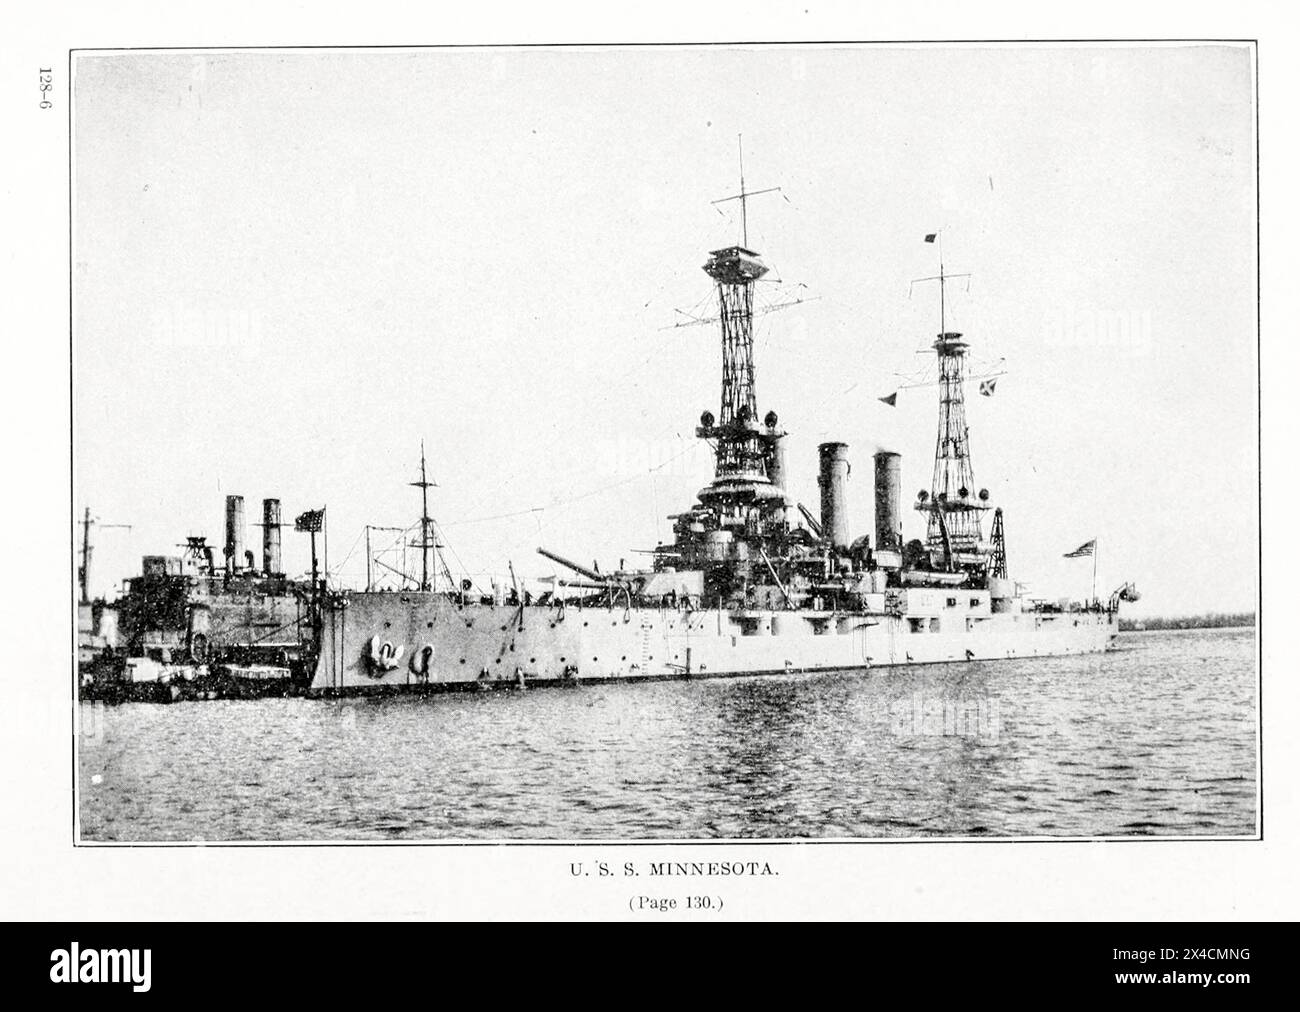 U. S. S. Minnesota from ' German submarine activities on the Atlantic coast of the United States and Canada ' by United States. Office of Naval Records and Library Publication date 1920  USS Minnesota (BB-22), the fifth of six Connecticut-class pre-dreadnought battleships, was the first ship of the United States Navy in honor of the 32nd state. She was laid down at the Newport News Shipbuilding Company of Newport News, Virginia in October 1903, launched in April 1905, and commissioned into the US fleet in March 1907, just four months after the revolutionary British battleship HMS Dreadnought e Stock Photo